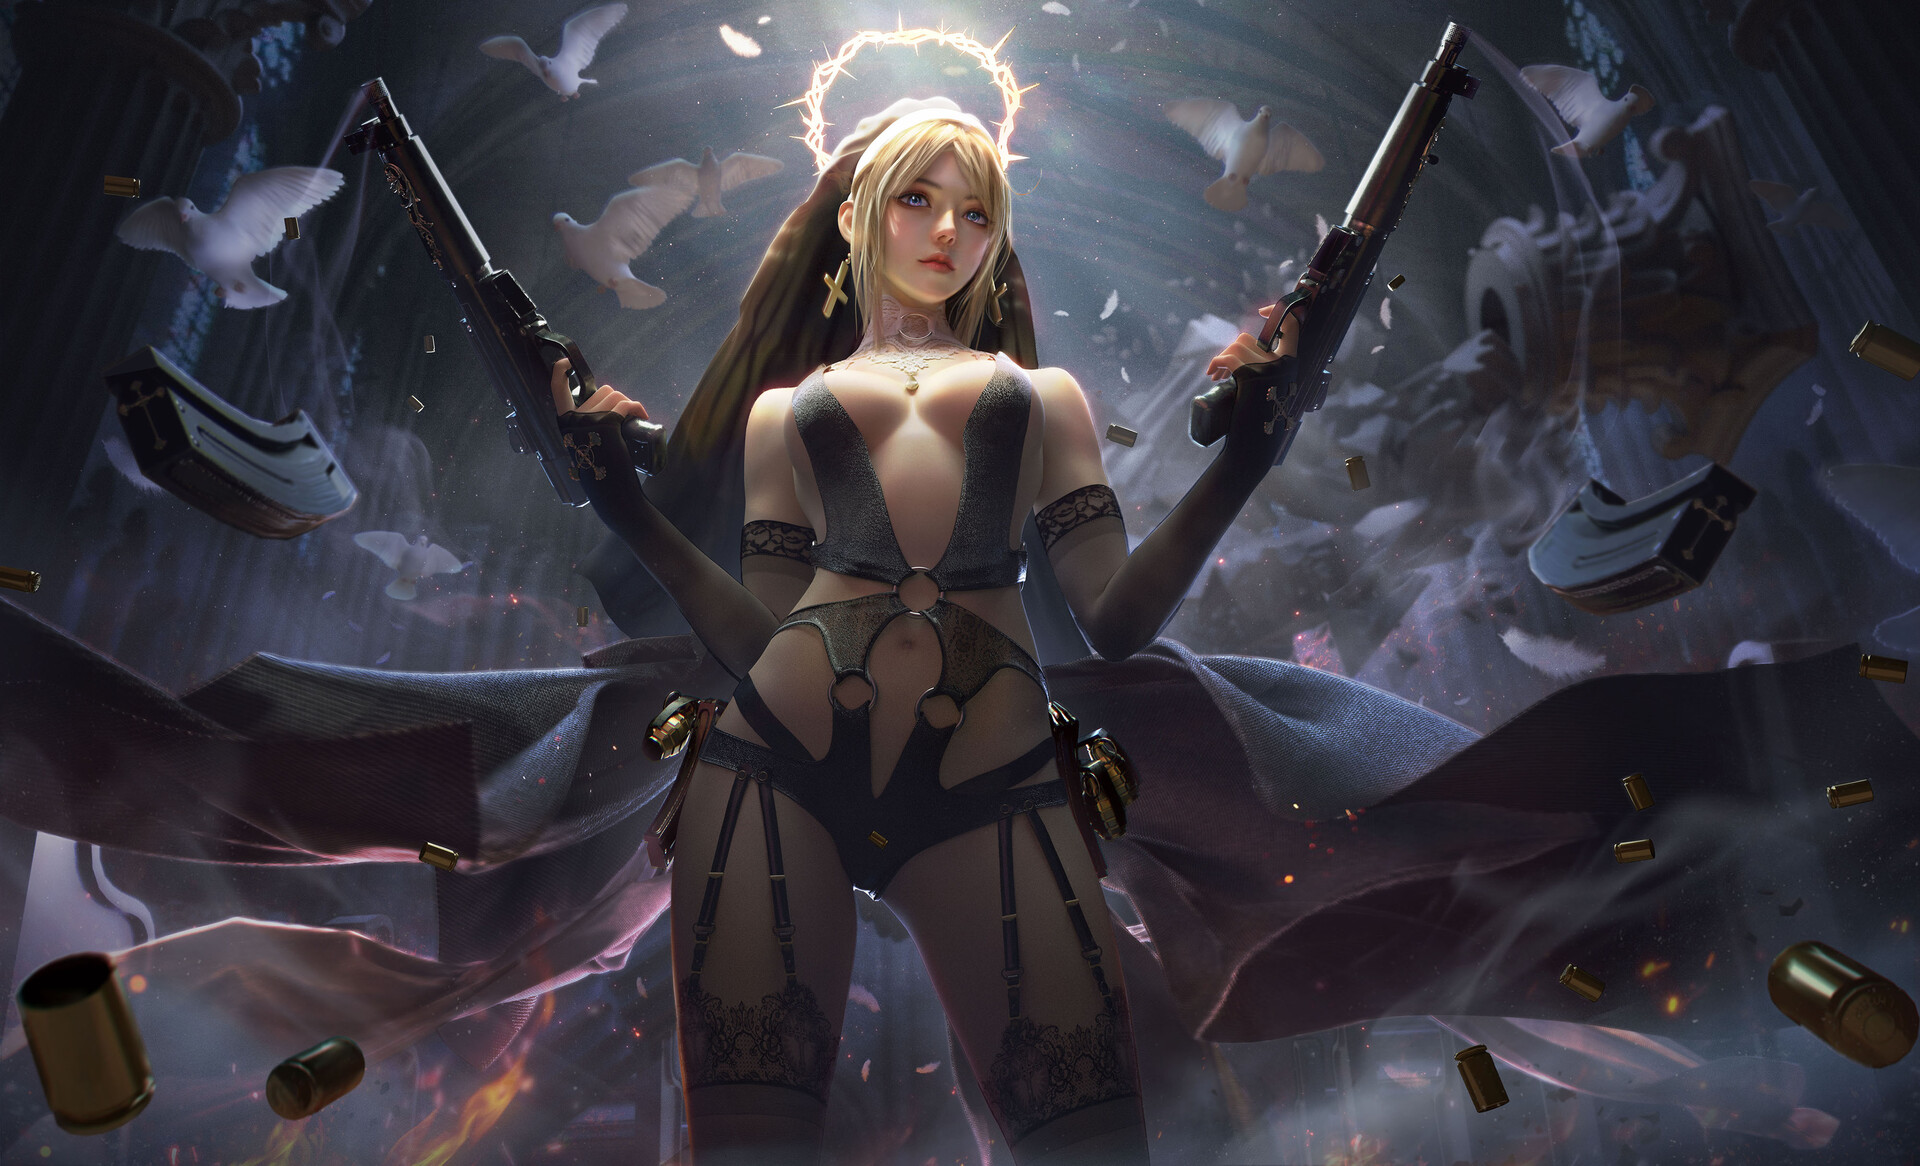 General 1920x1166 artwork ArtStation women girls with guns standing belly boobs blonde birds animals dove stockings weapon necklace Yuan Yuan nuns frontal view low-angle halo skimpy clothes gun looking at viewer belly button arm warmers centered cape thighs emotionless gun smoke ammunition pistol garter belt cross earring grenades gothic architecture veils dual wield gemstone necklace